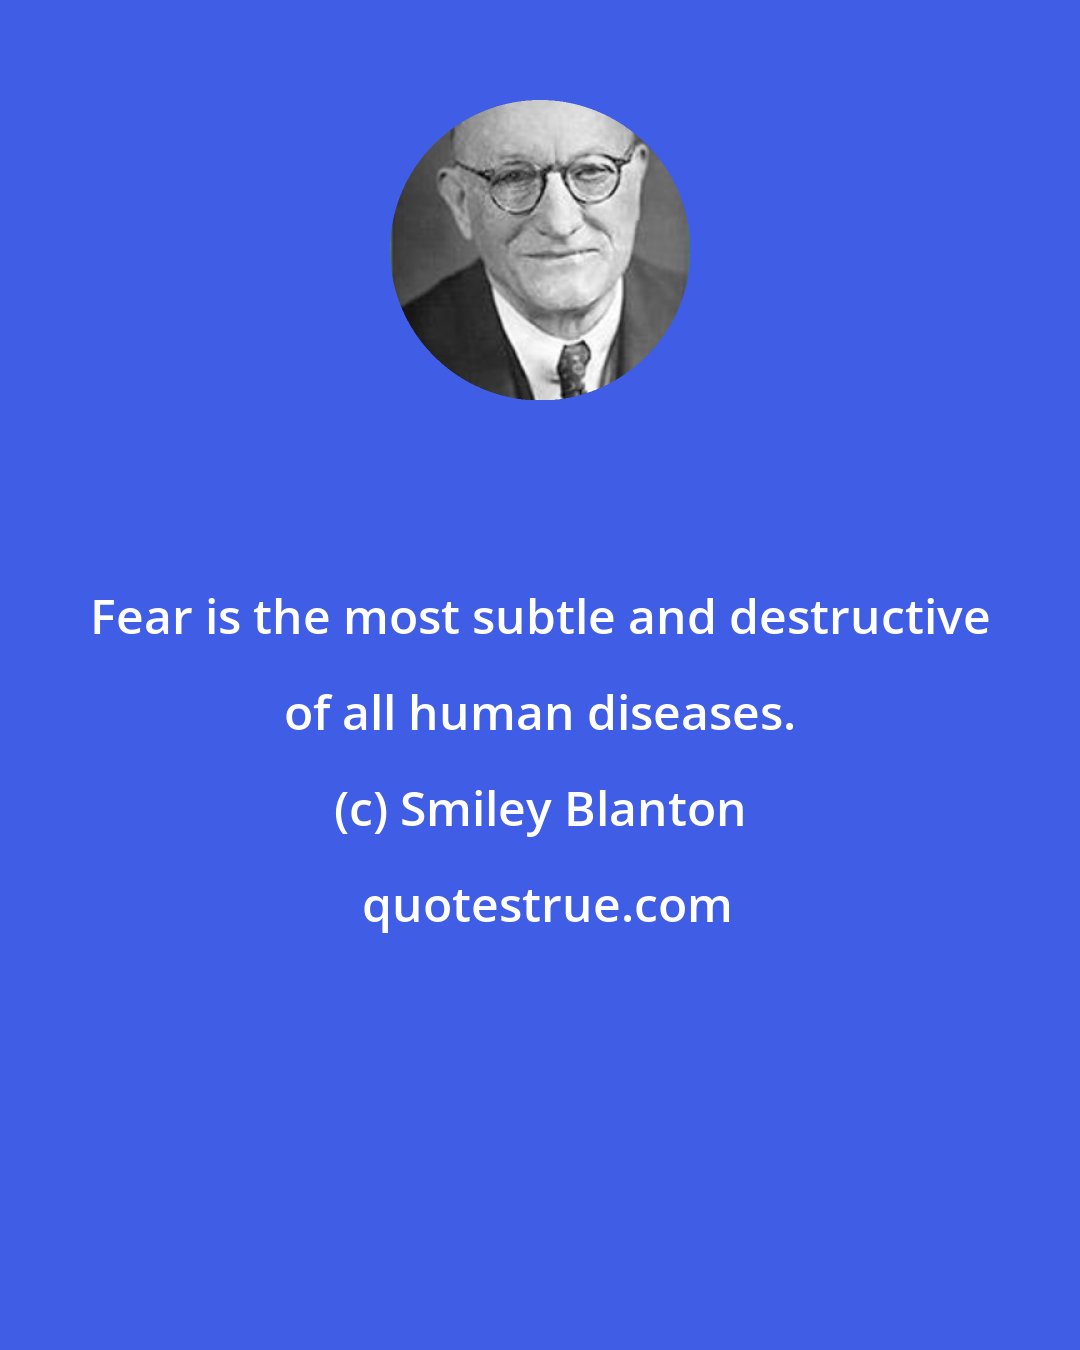 Smiley Blanton: Fear is the most subtle and destructive of all human diseases.